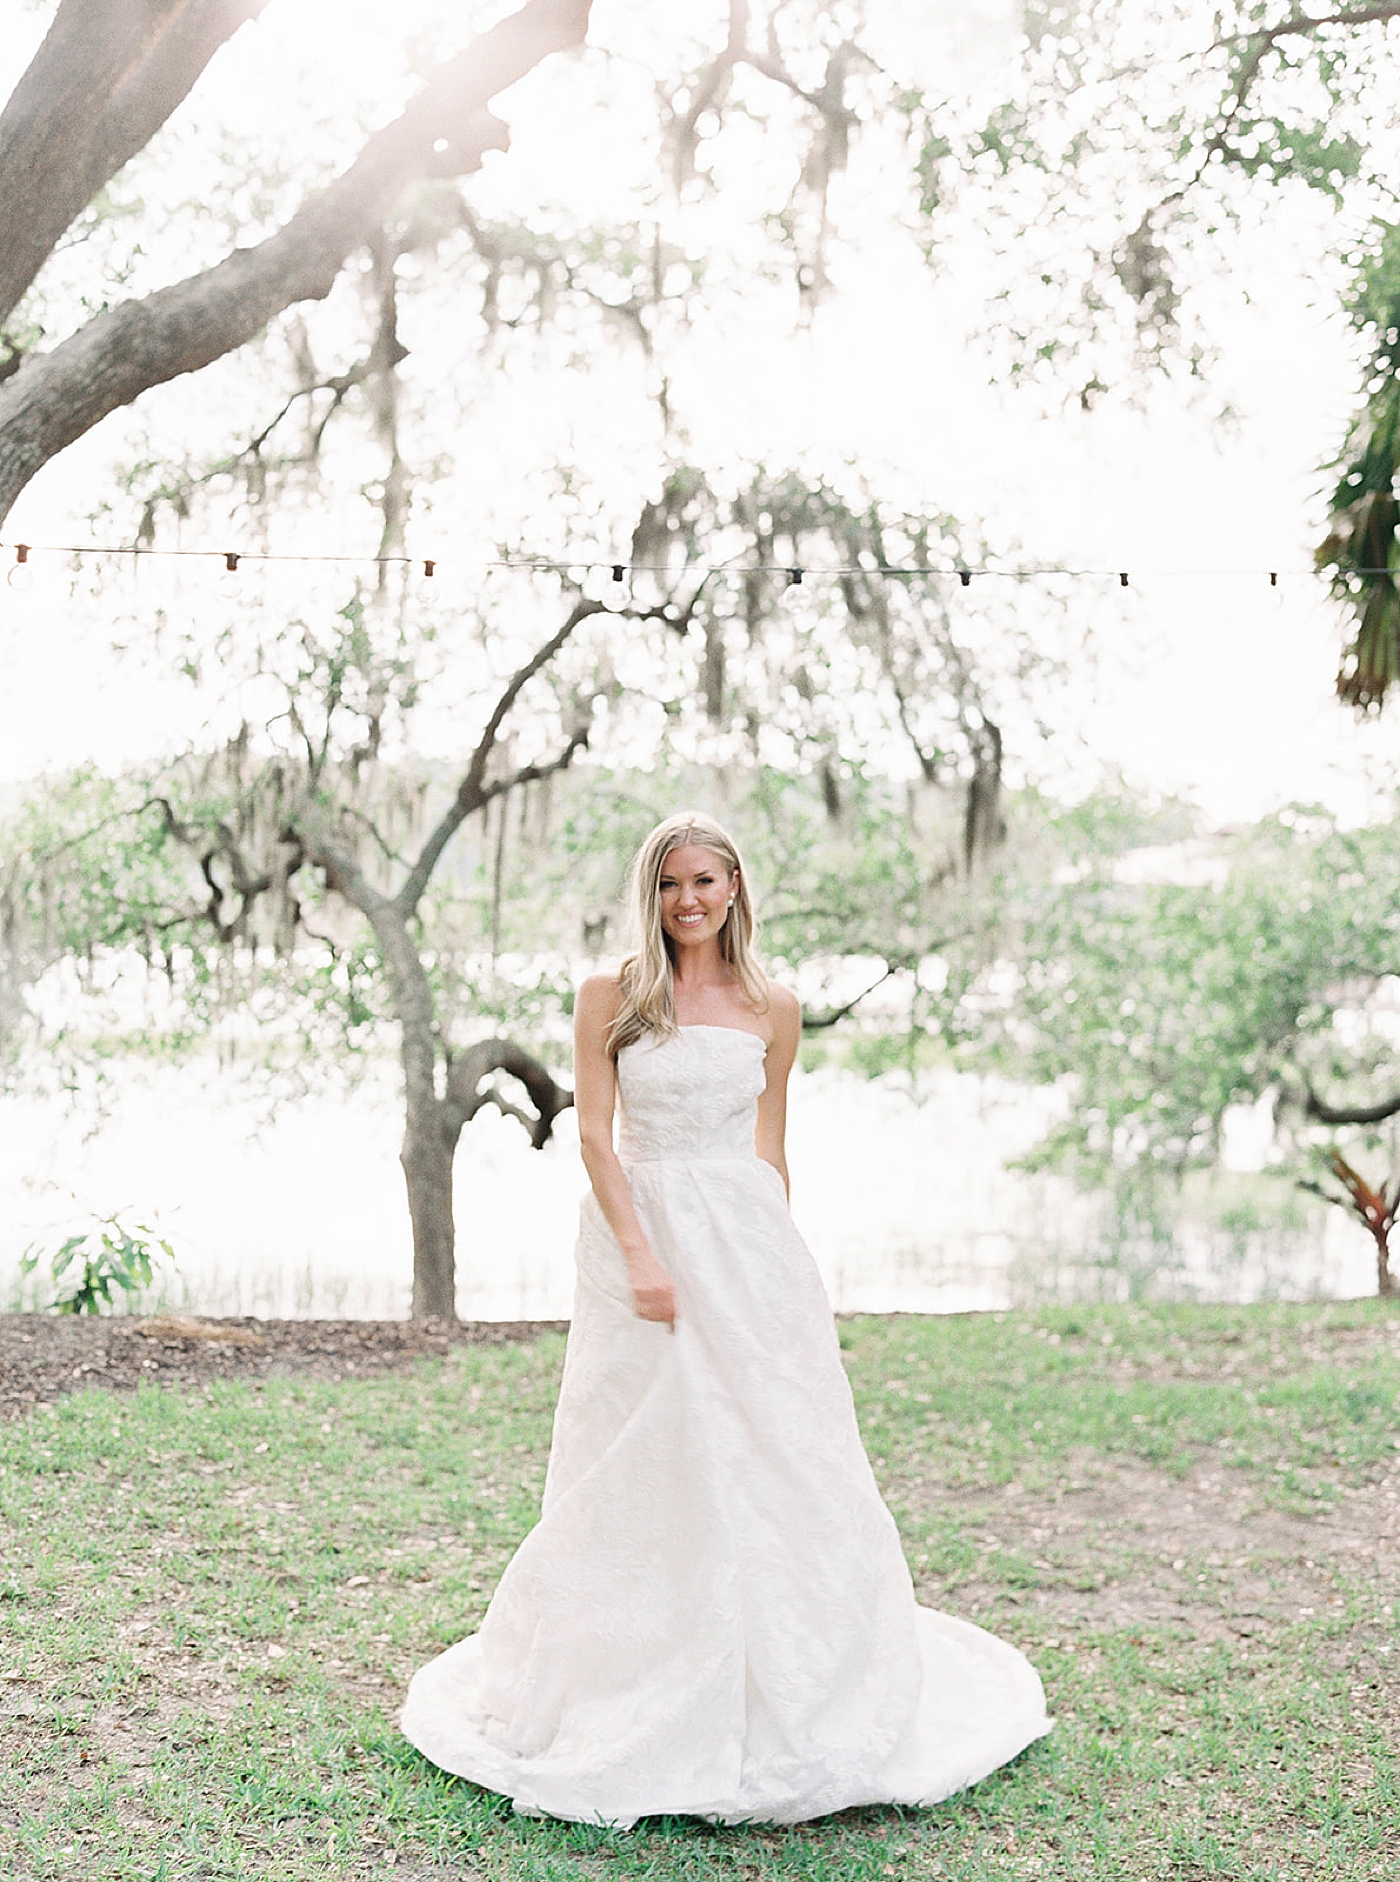 Bride in white gown twirling | Carters Event Co